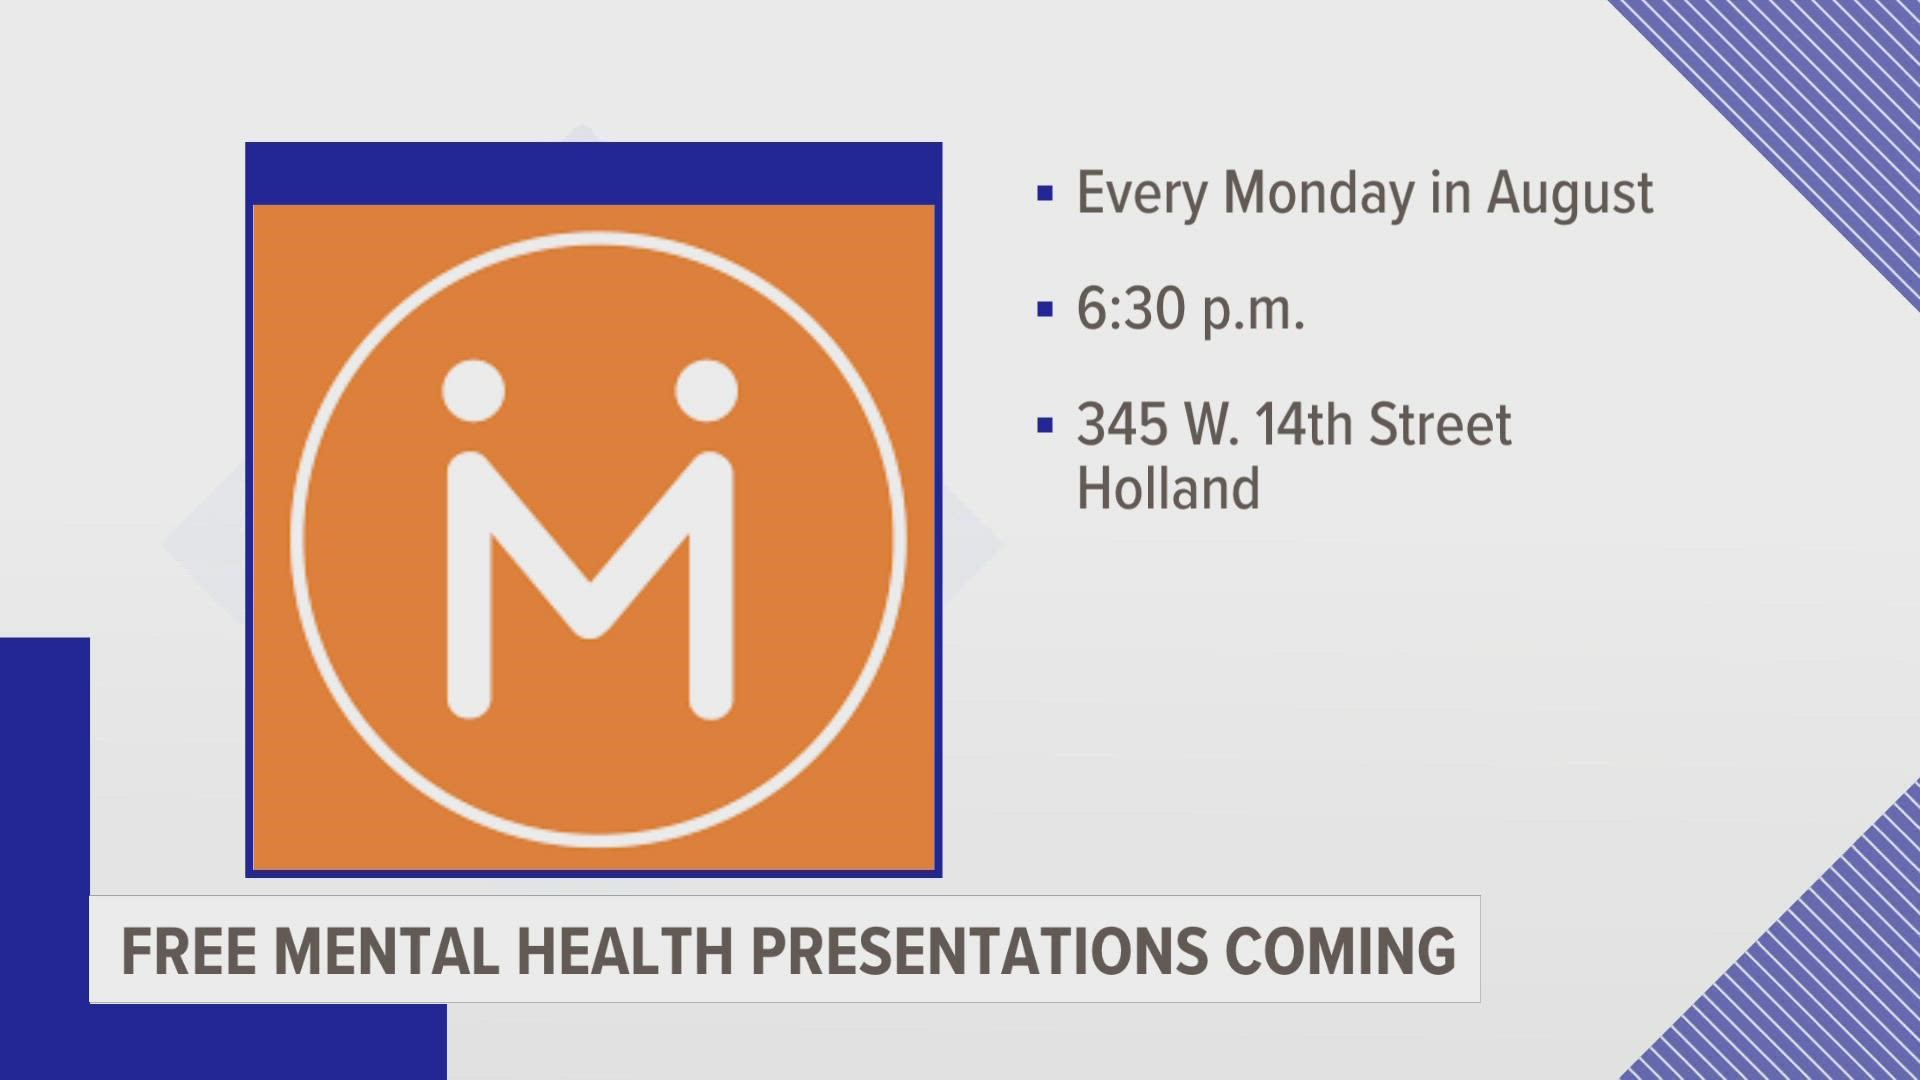 The Momentum Center for Social Engagement has organized five presentations where people can learn more about mental health and the resources available to them.